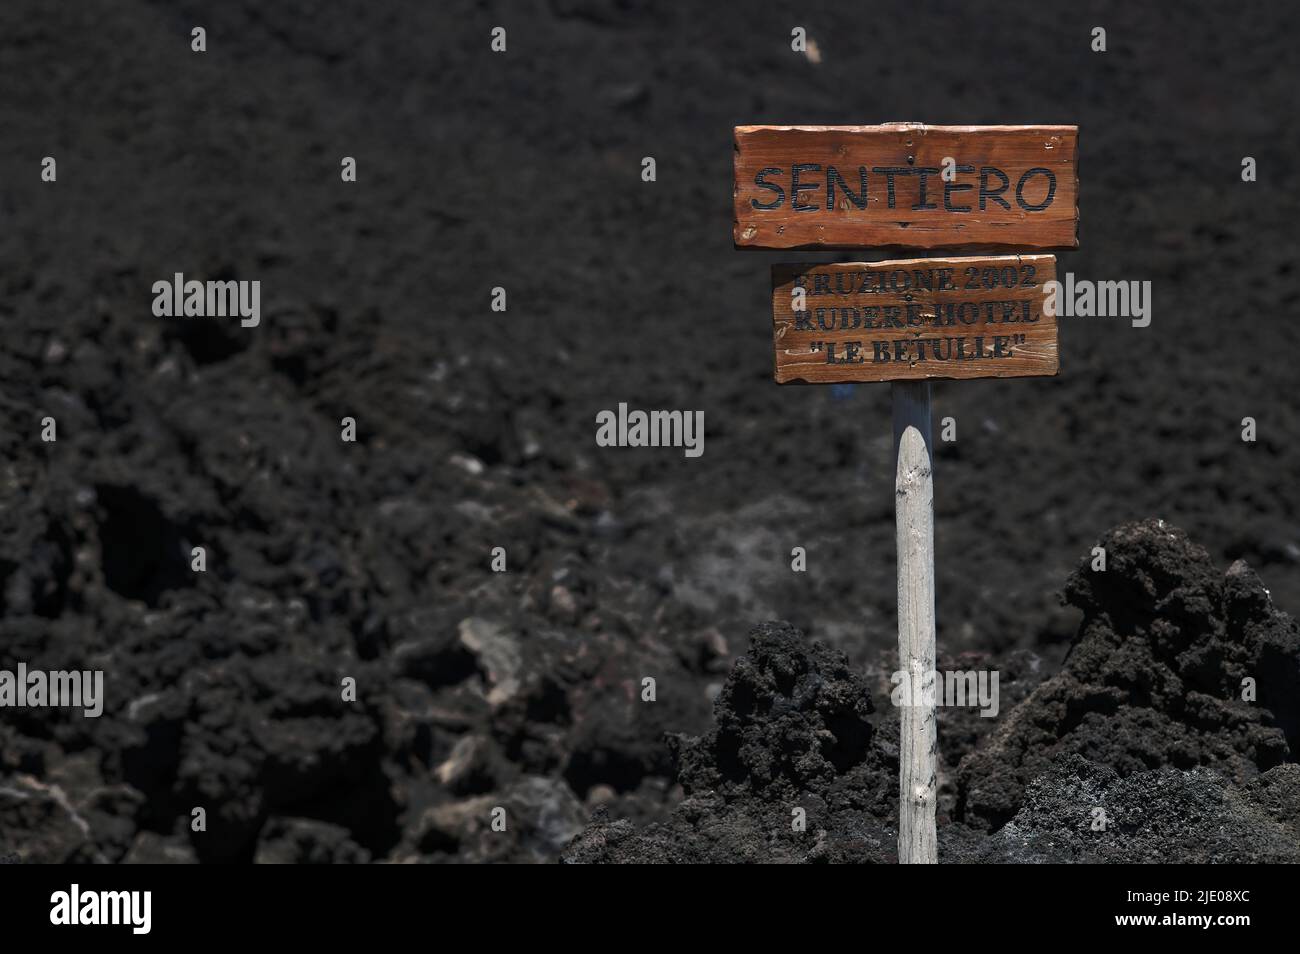 Signpost across lava field to Le Betulle hotel destroyed by eruption, 2002, Piano Provenzana Etna North, Etna volcano, Sicily, Italy Stock Photo